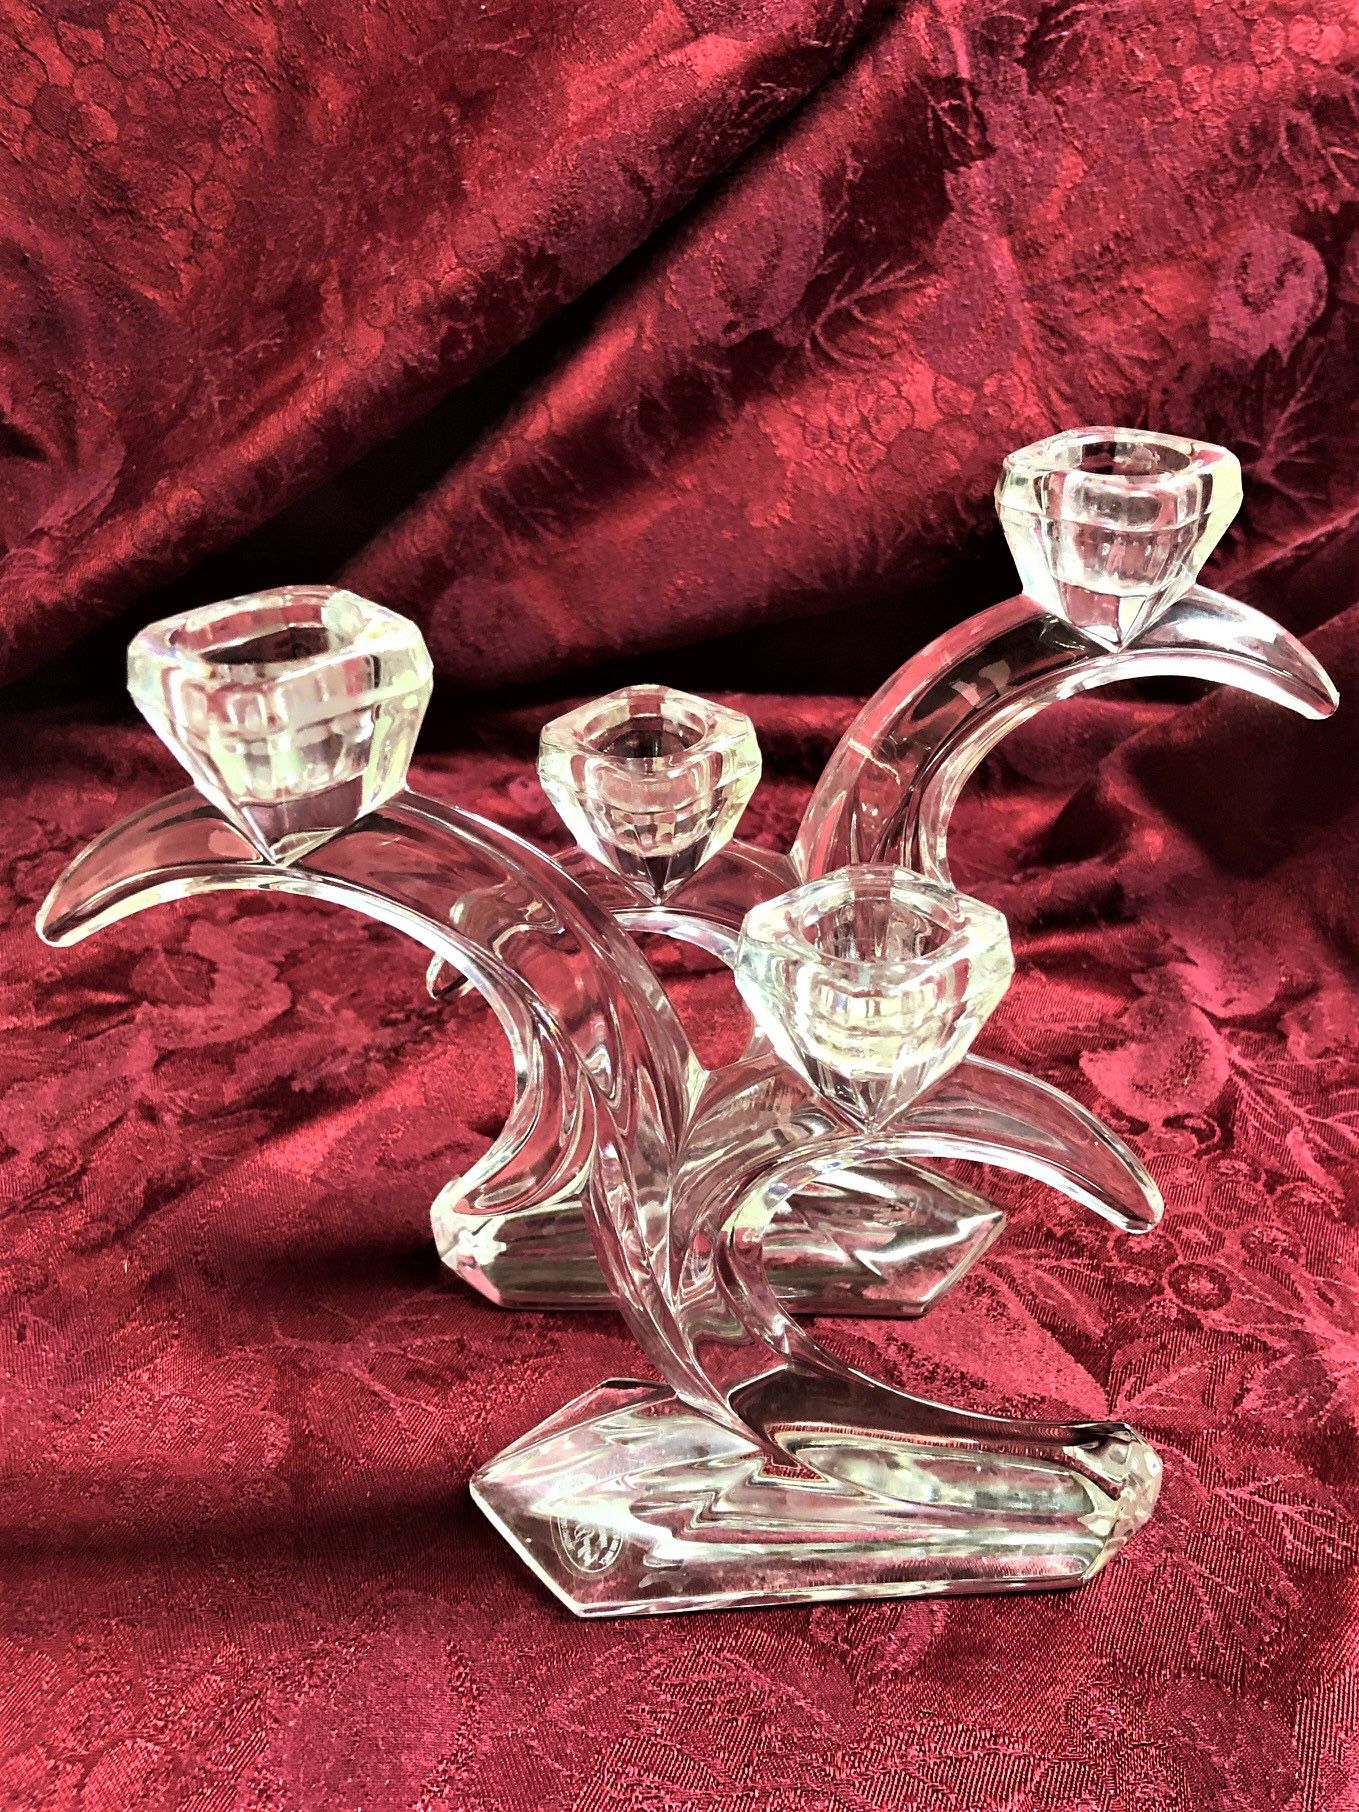 Royal Gallery Lead Crystal Candlestick Set / candle holders made in Germany